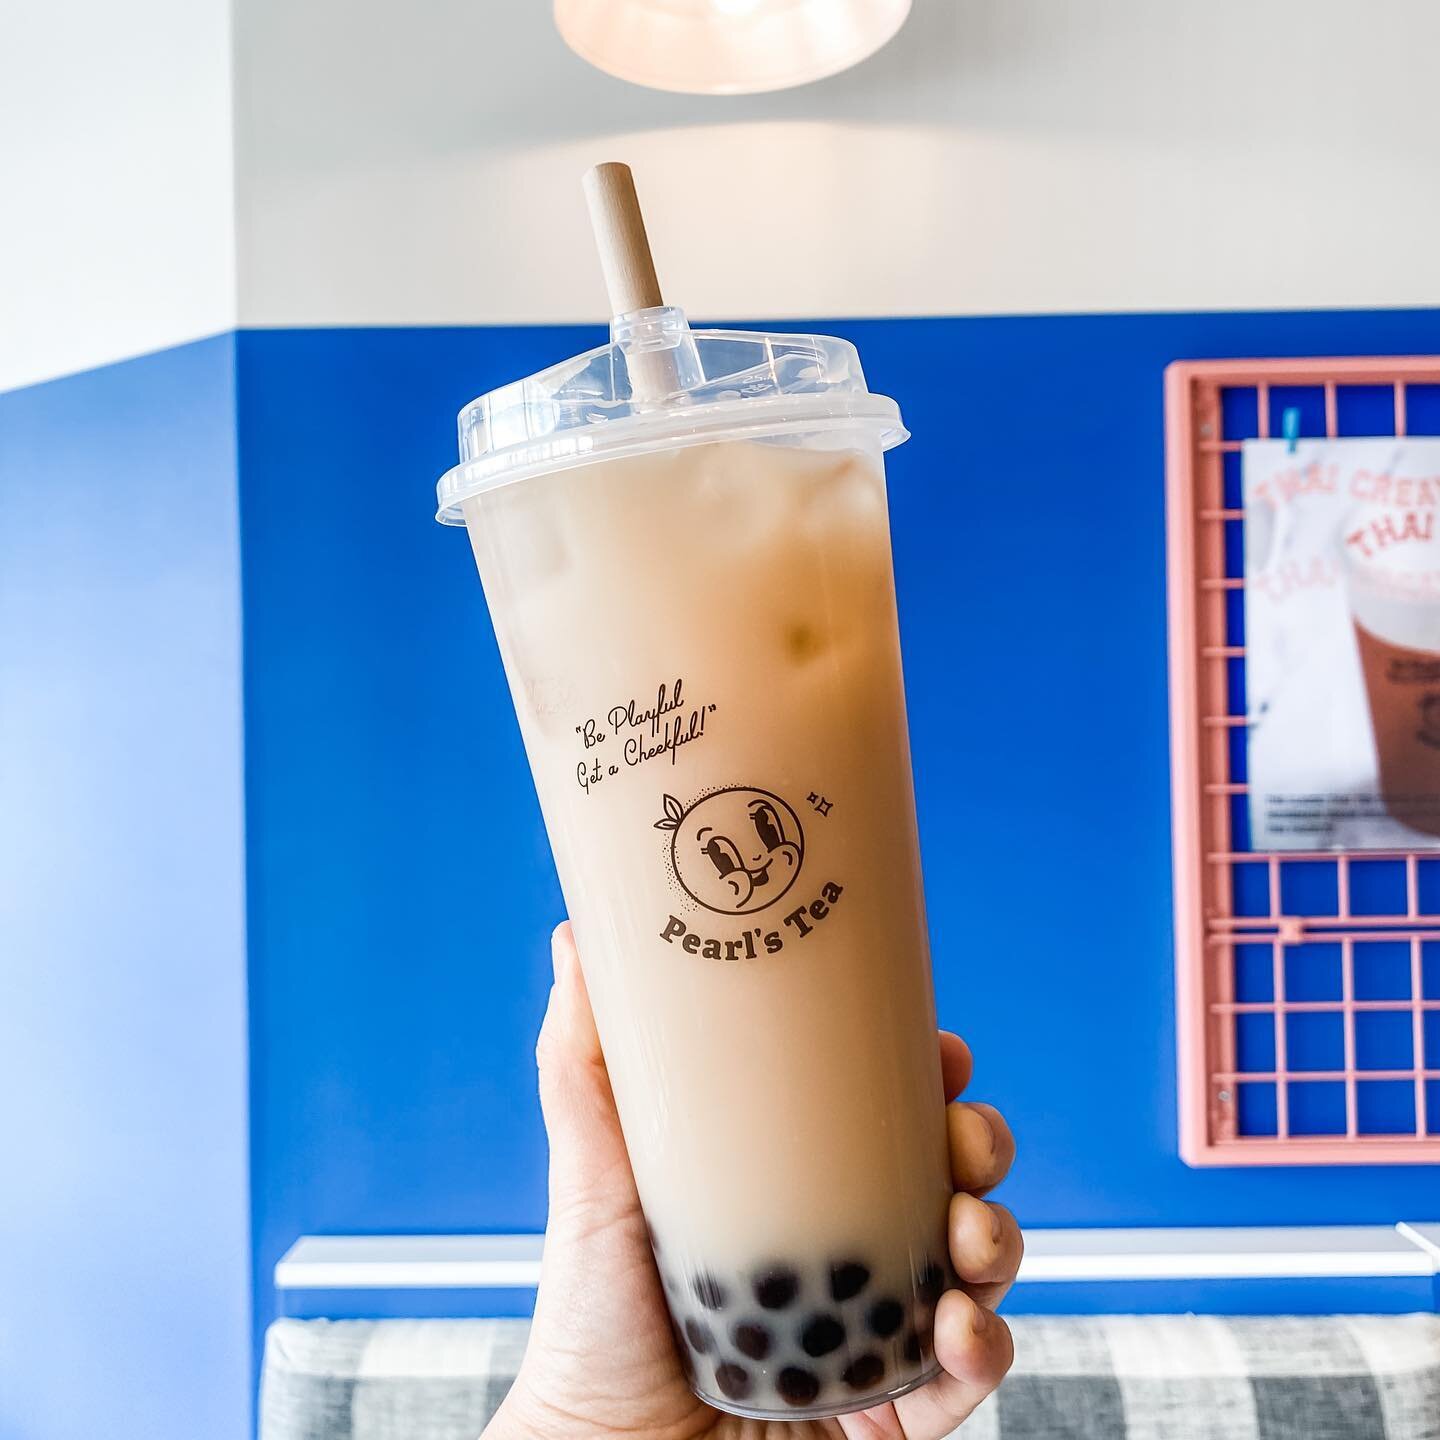 When upgrading to a large is the right choice 😉 now til Monday, 10% off any milk tea! ✨ #upgradeya #pearlstea